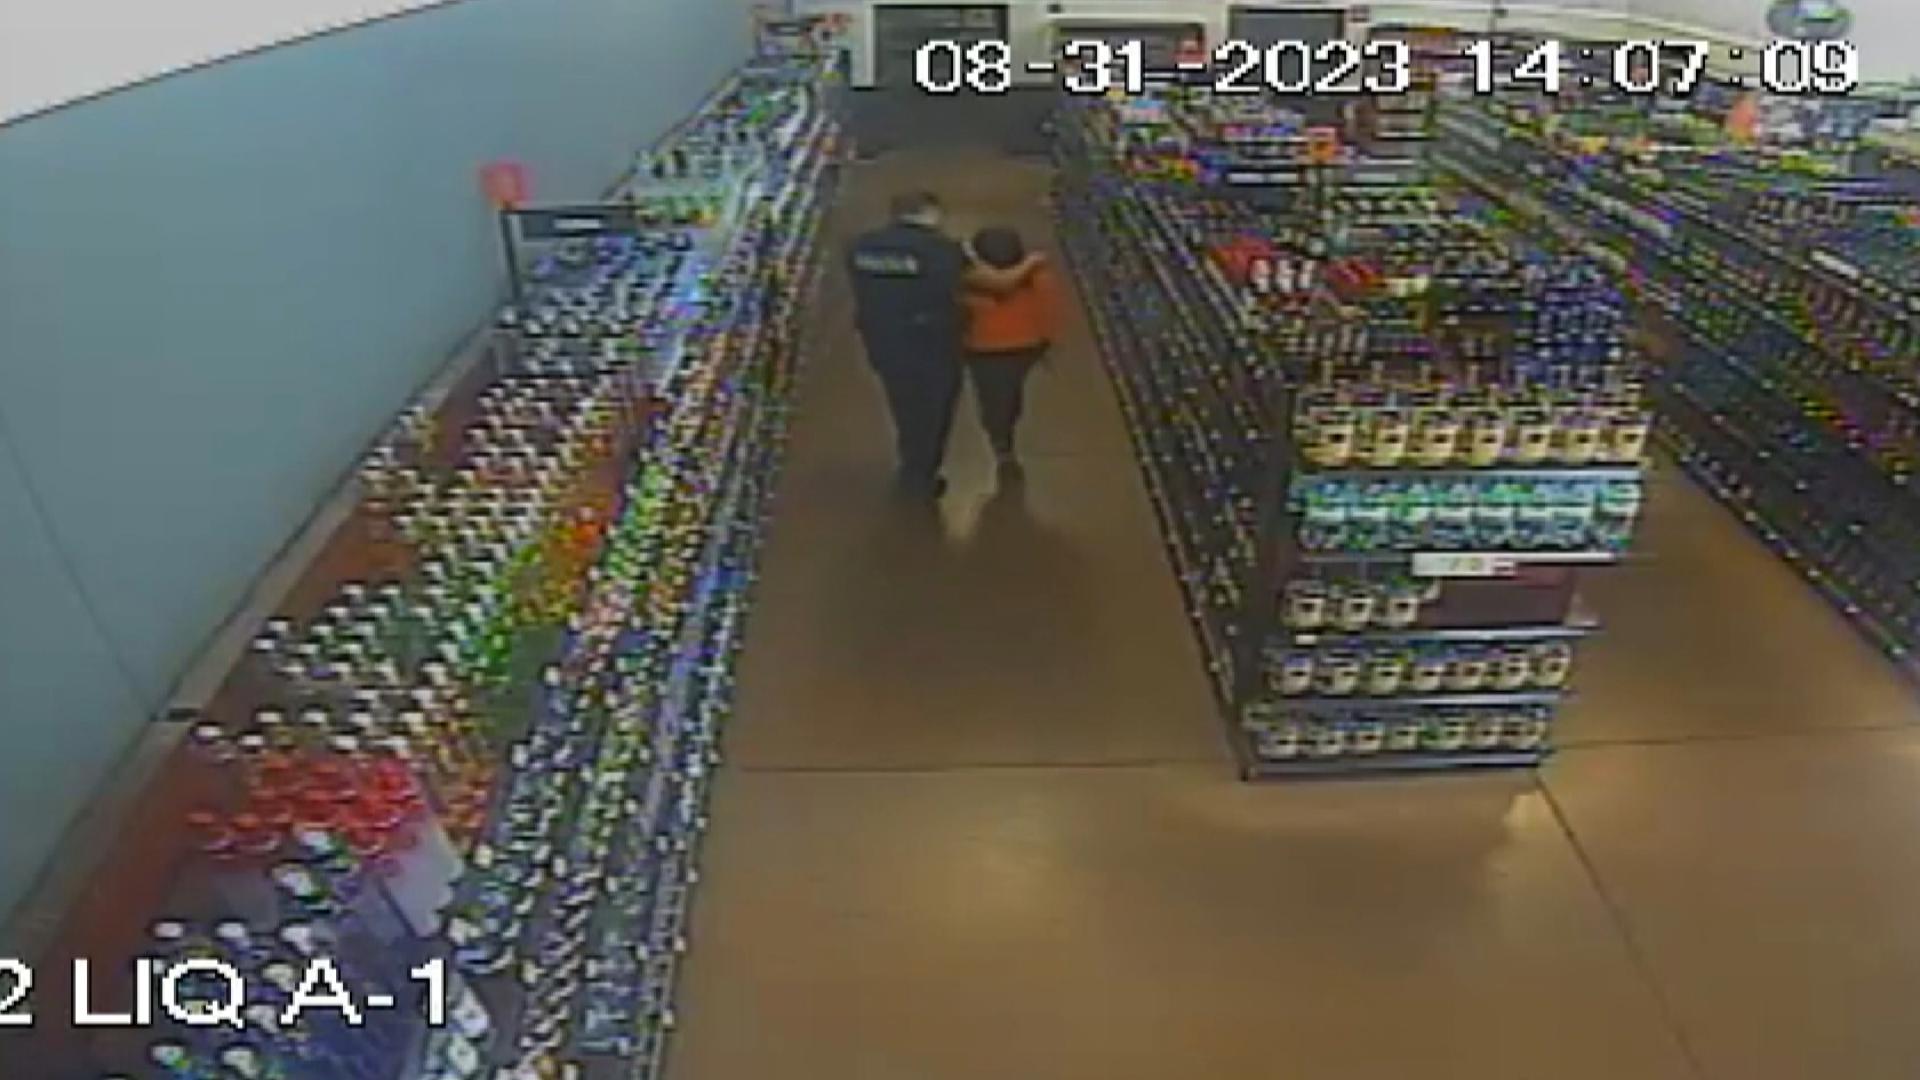 Surveillance cameras at the store captured the two multiple times, according to Columbus Police Chief Elaine Bryant.